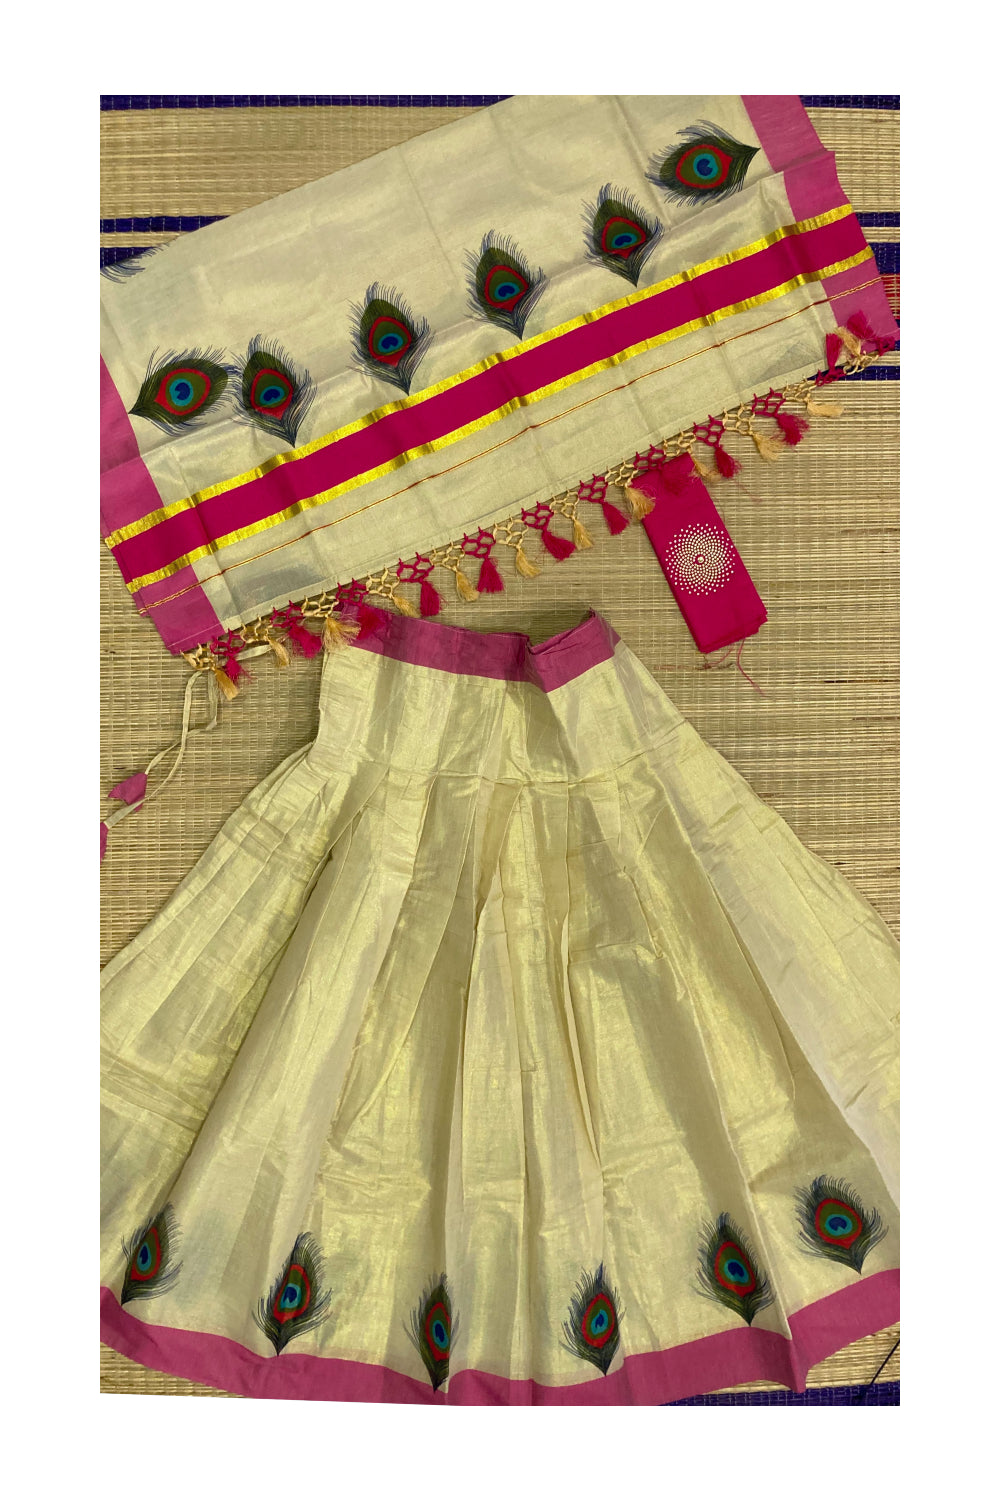 Kerala Tissue Stitched Dhavani Set with Pink Blouse Piece and Neriyathu with Peacock Feather Mural Work